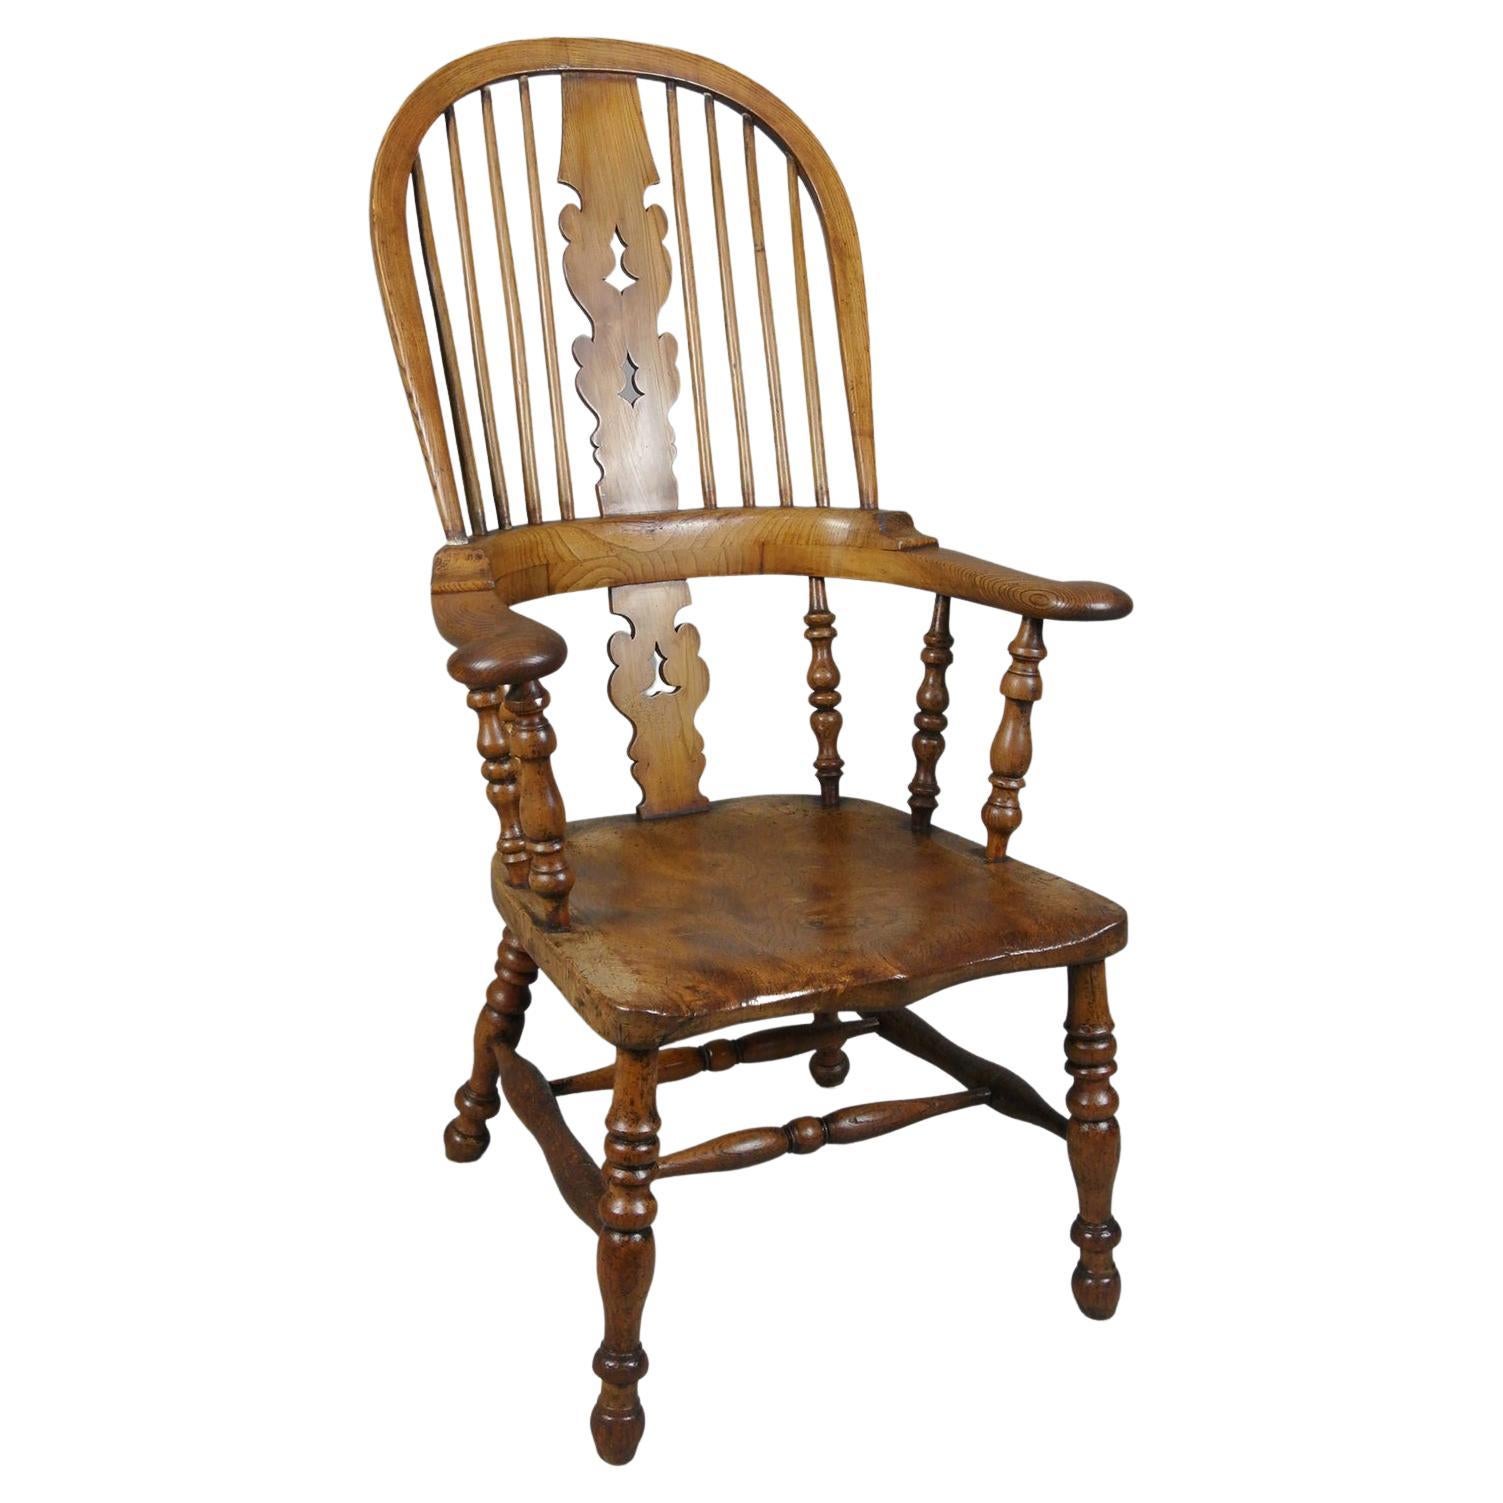 Rare 19th Century Yew, Elm and Ash Windsor Chair c. 1850 For Sale